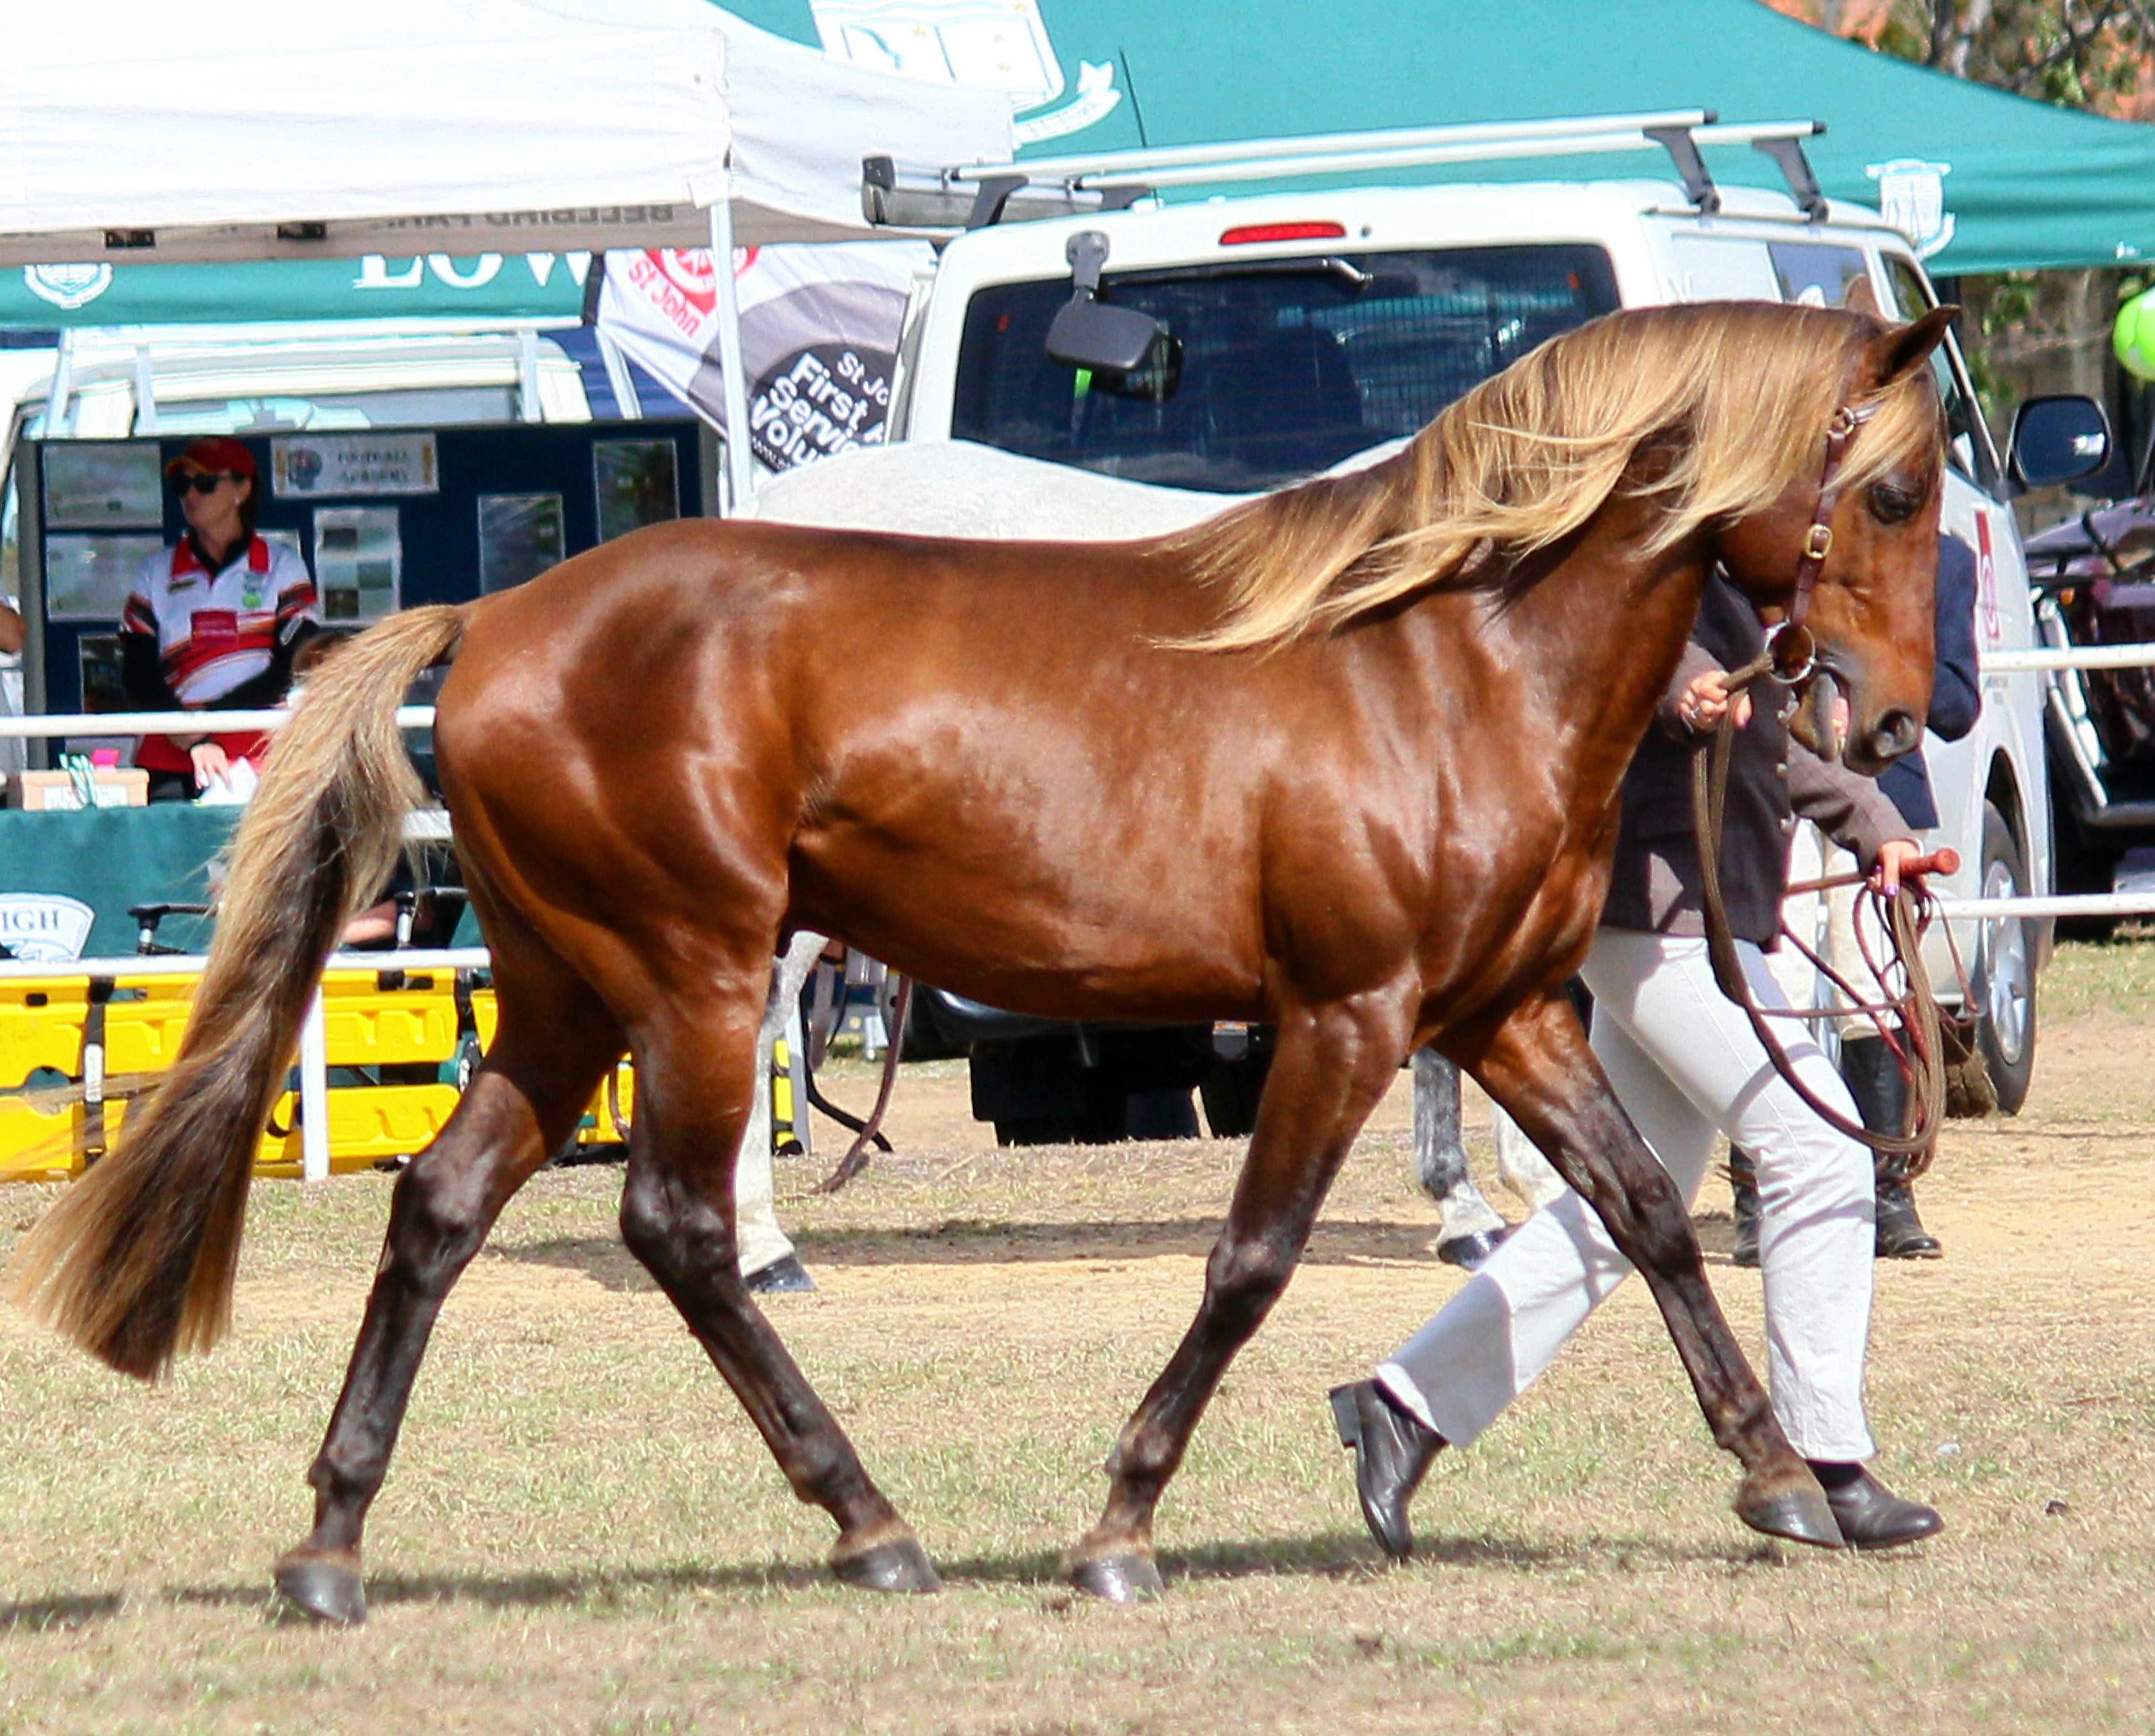 Bee made a quick return to the show ring after being officially retired from showing after Brisbane Royal 2015. He came to the Lowood Show and won Champion Waler stallion and was well praised by the judge who remembered him from his heyday